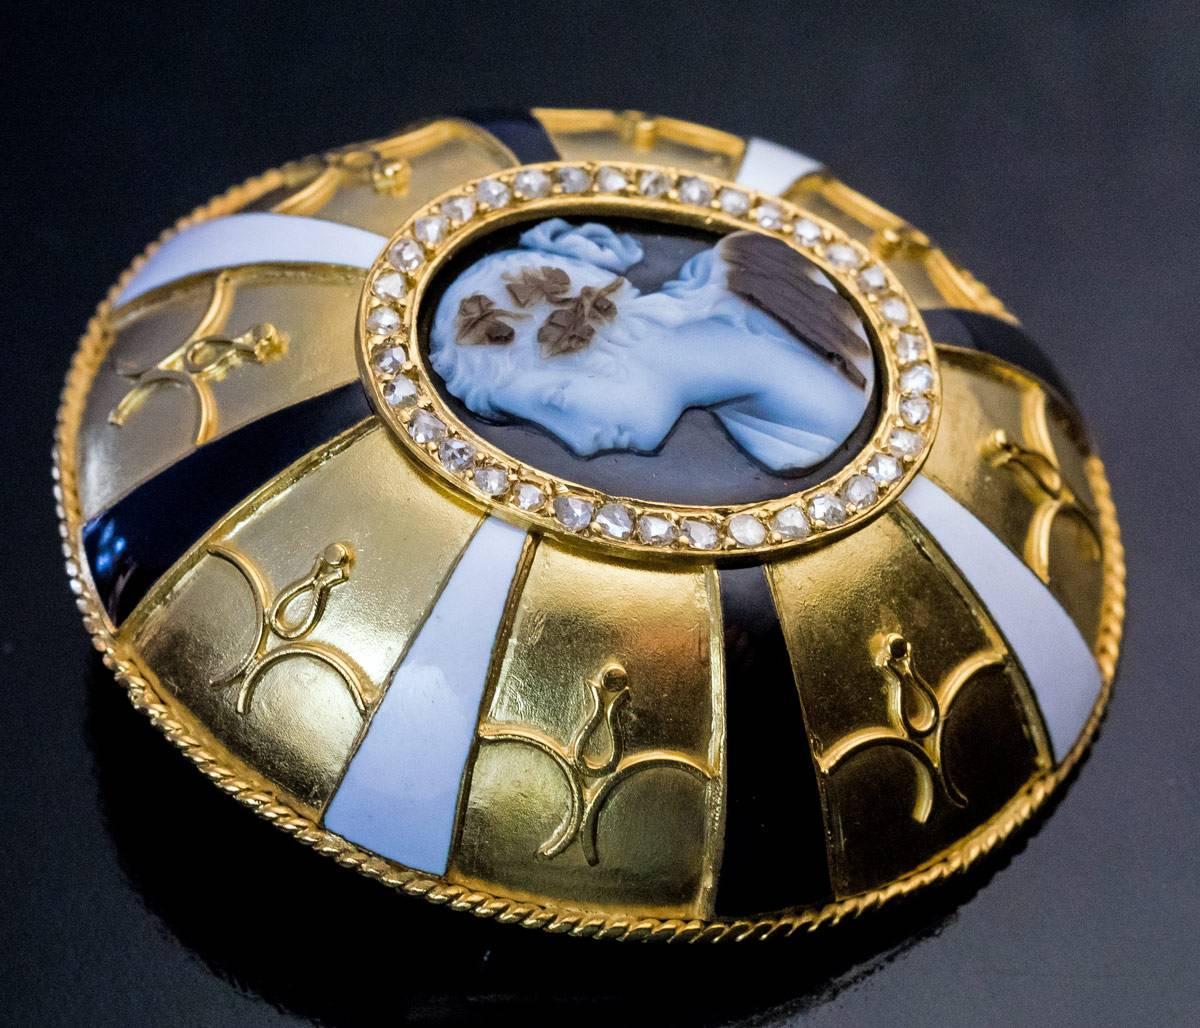 Circa 1880

A Renaissance style large 18K matte gold brooch is centered with a carved agate cameo of a profile female bust framed by numerous rose cut diamonds and surrounded by gold filigree festoons and black & white opaque enamel rays.

The